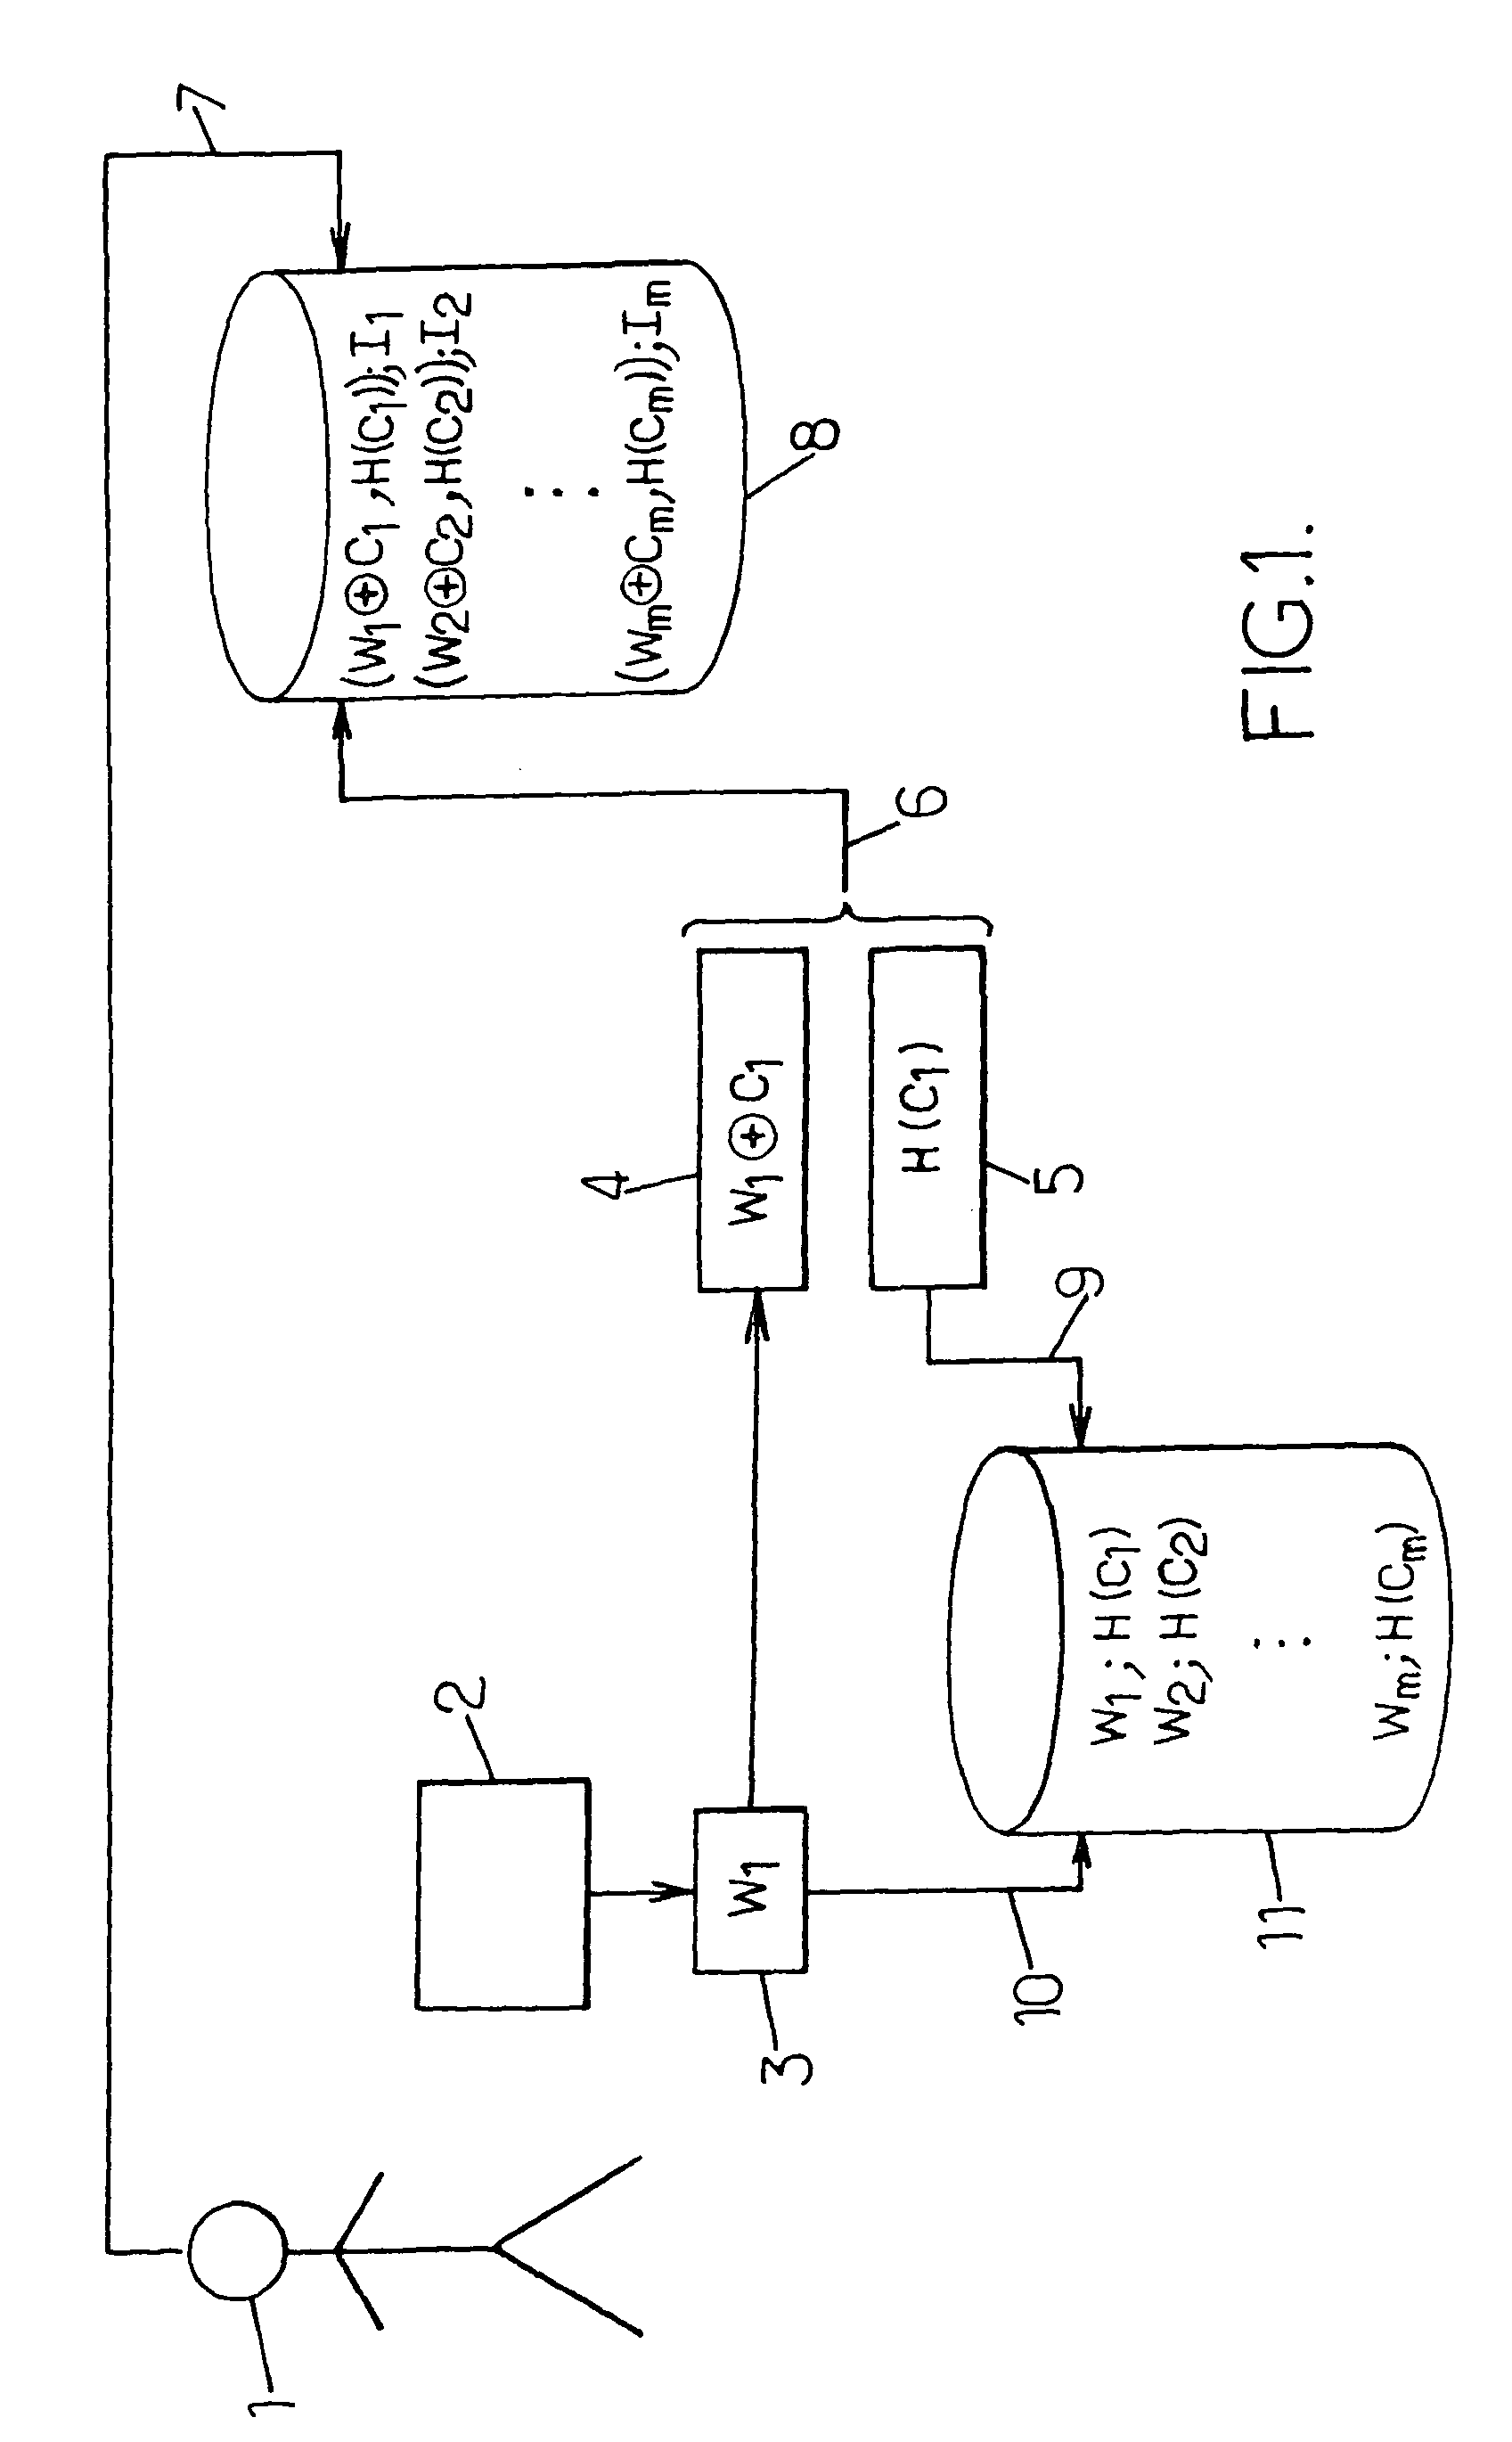 Methods of identifier determination and of biometric verification and associated systems